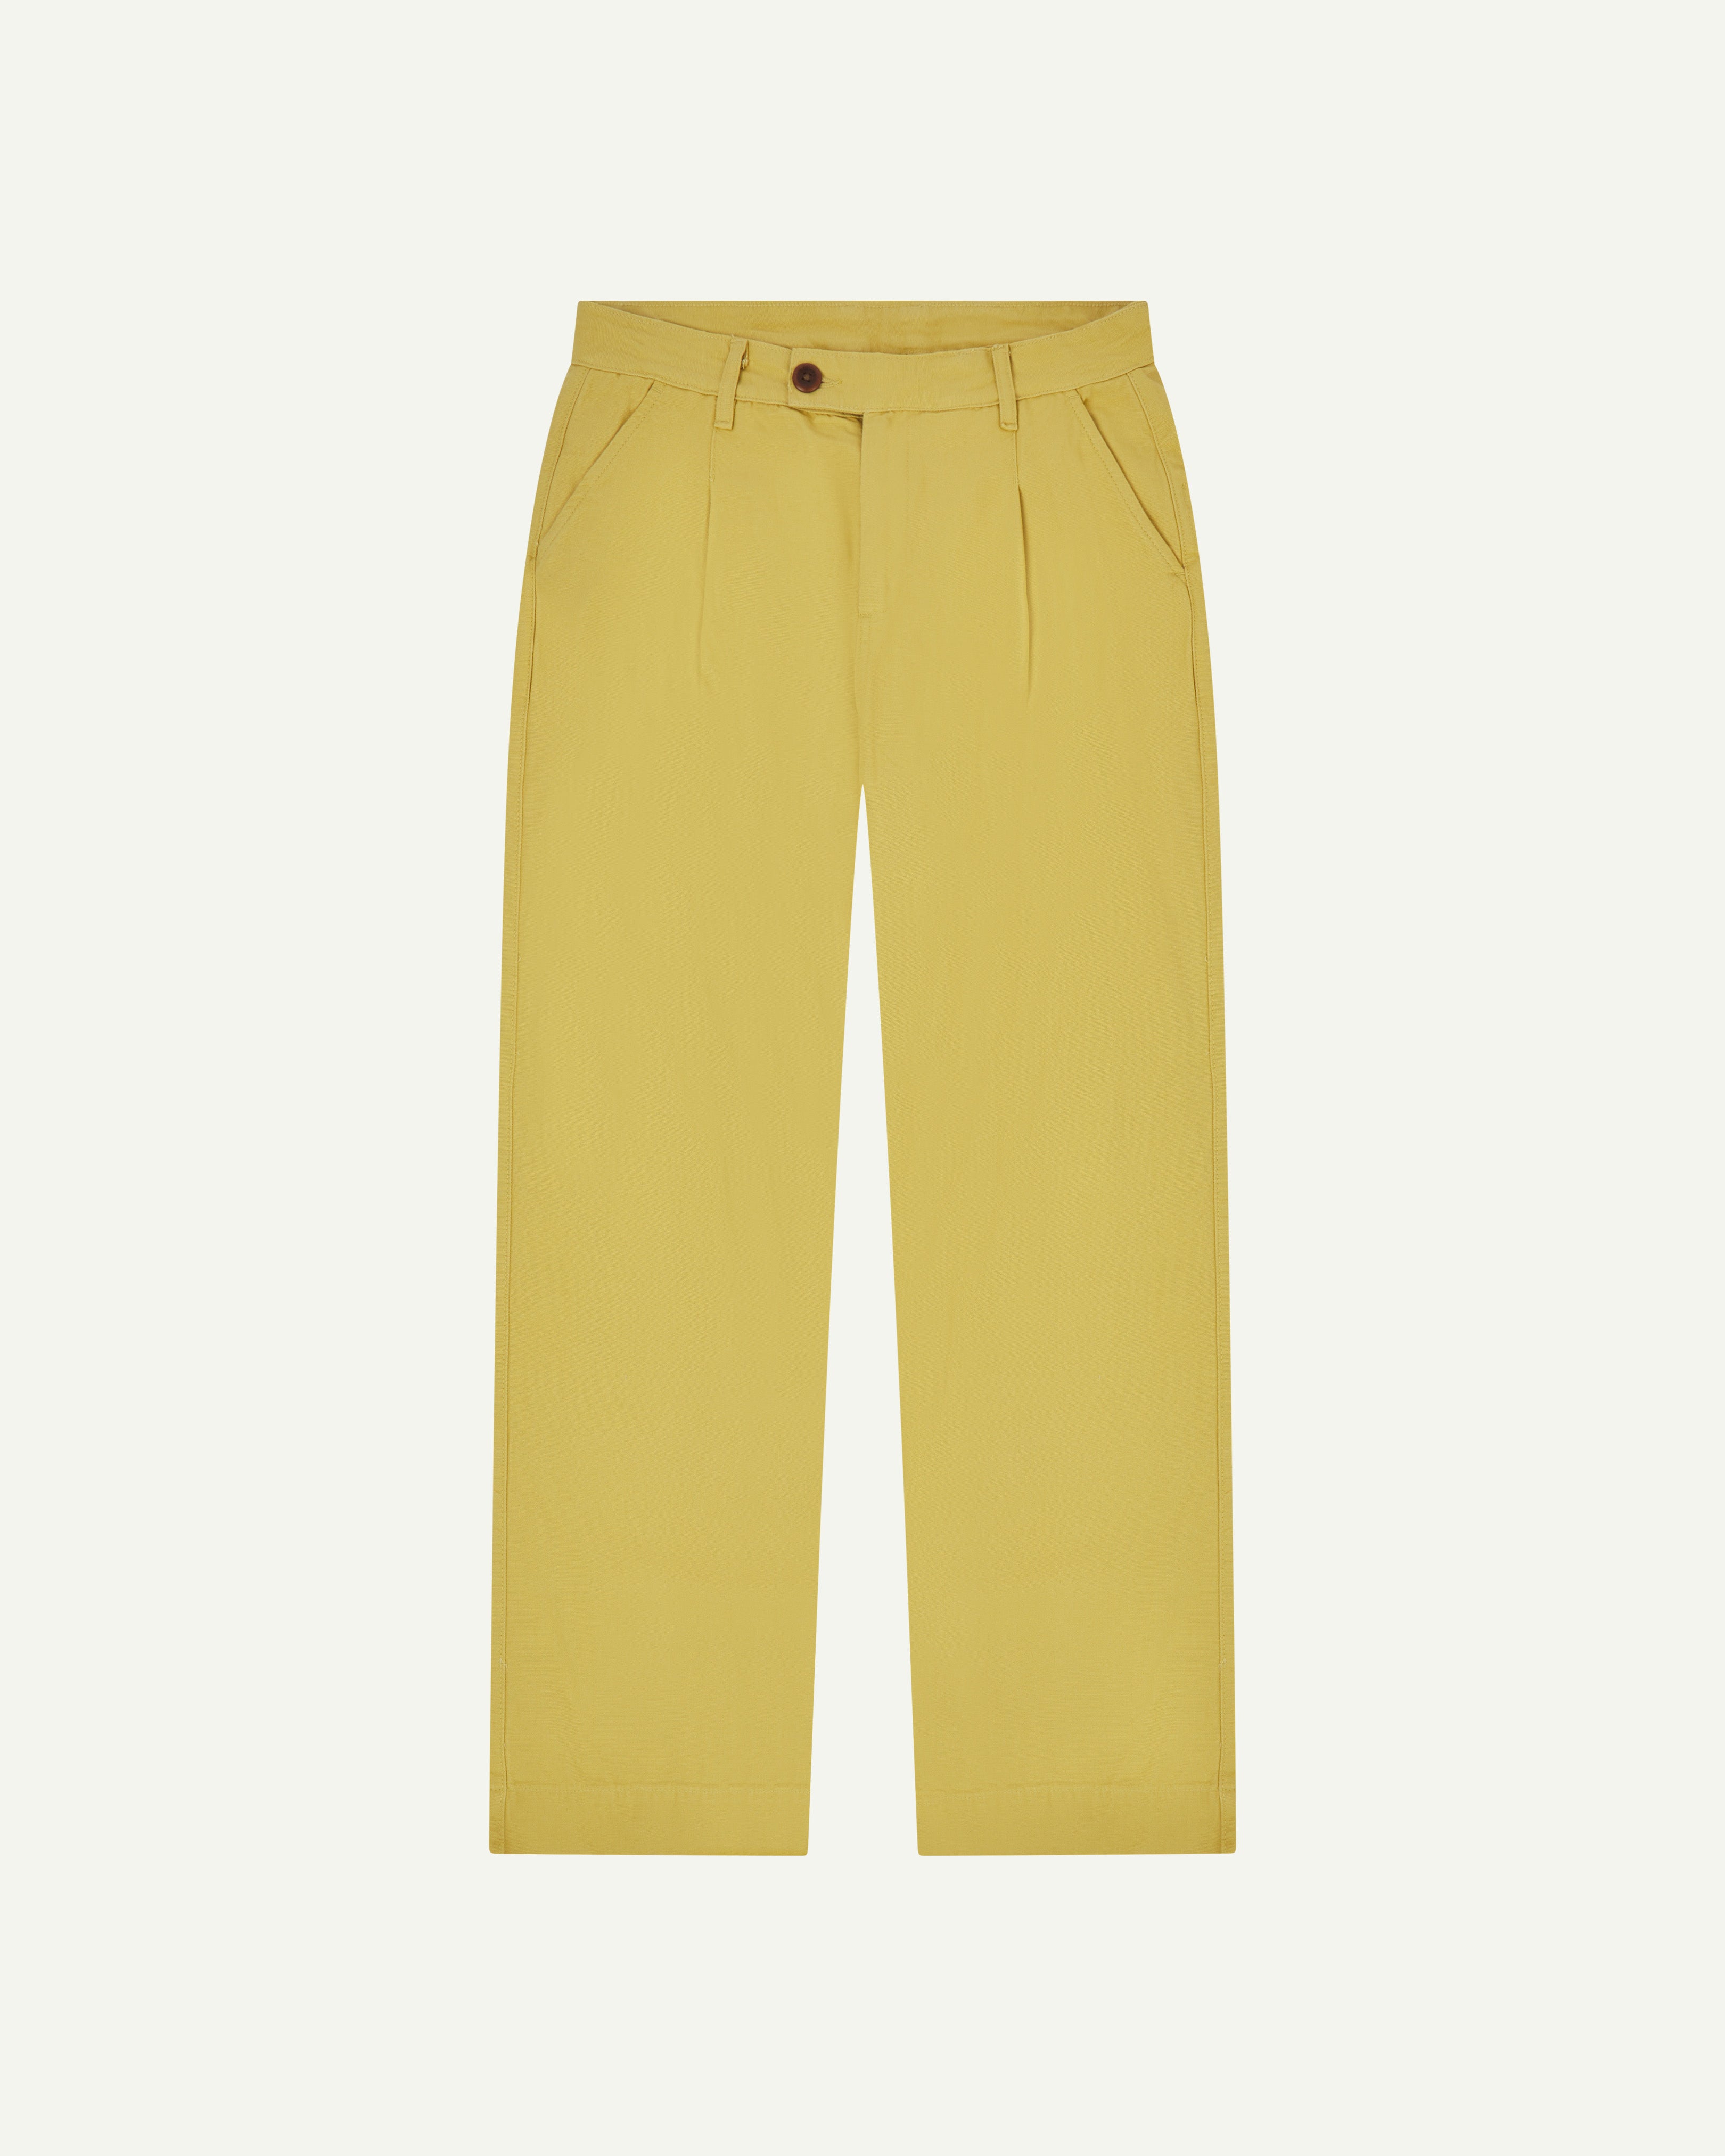 Front flat shot of #5018 Uskees men's organic mid-weight cotton boat trousers in yellow showing wide leg style